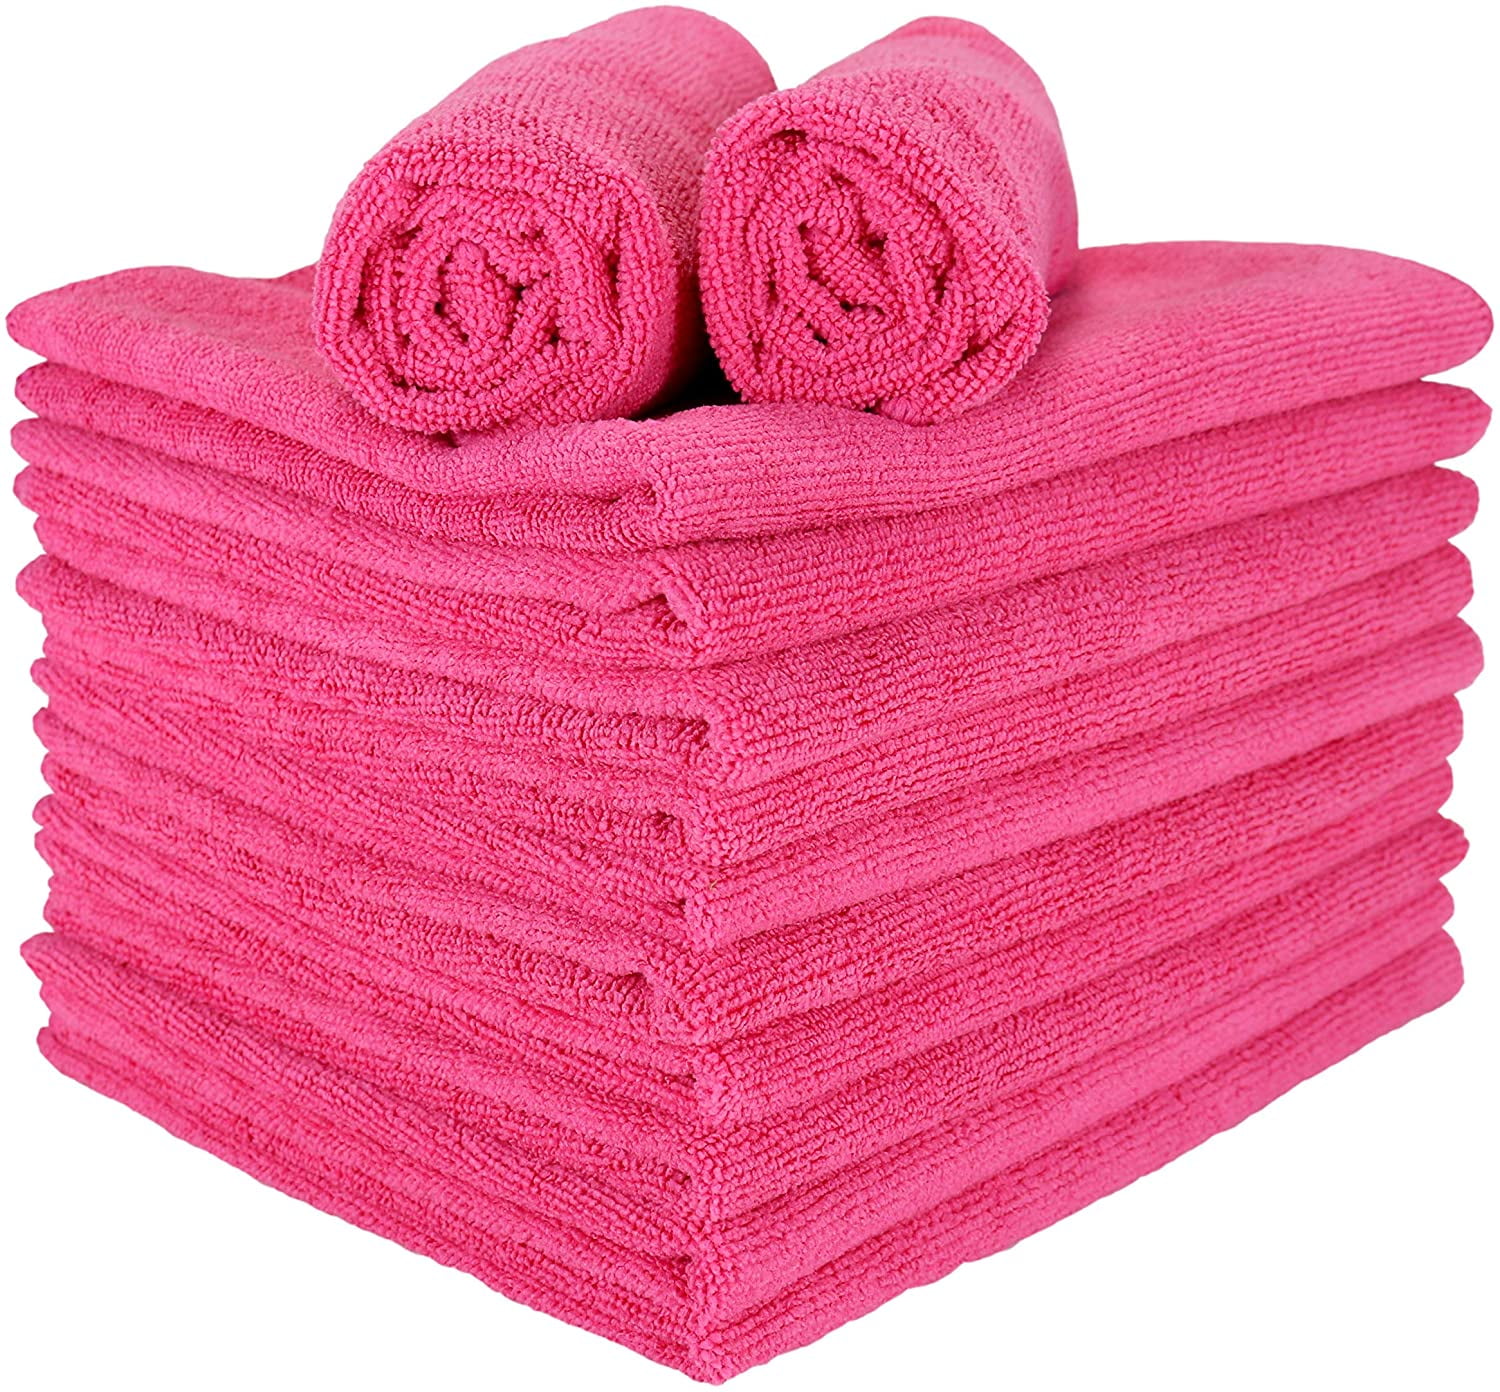 POTTERY BARN PRETTY PINK TURKISH (2PC) SET THICK HAND TOWELS 19 X 27